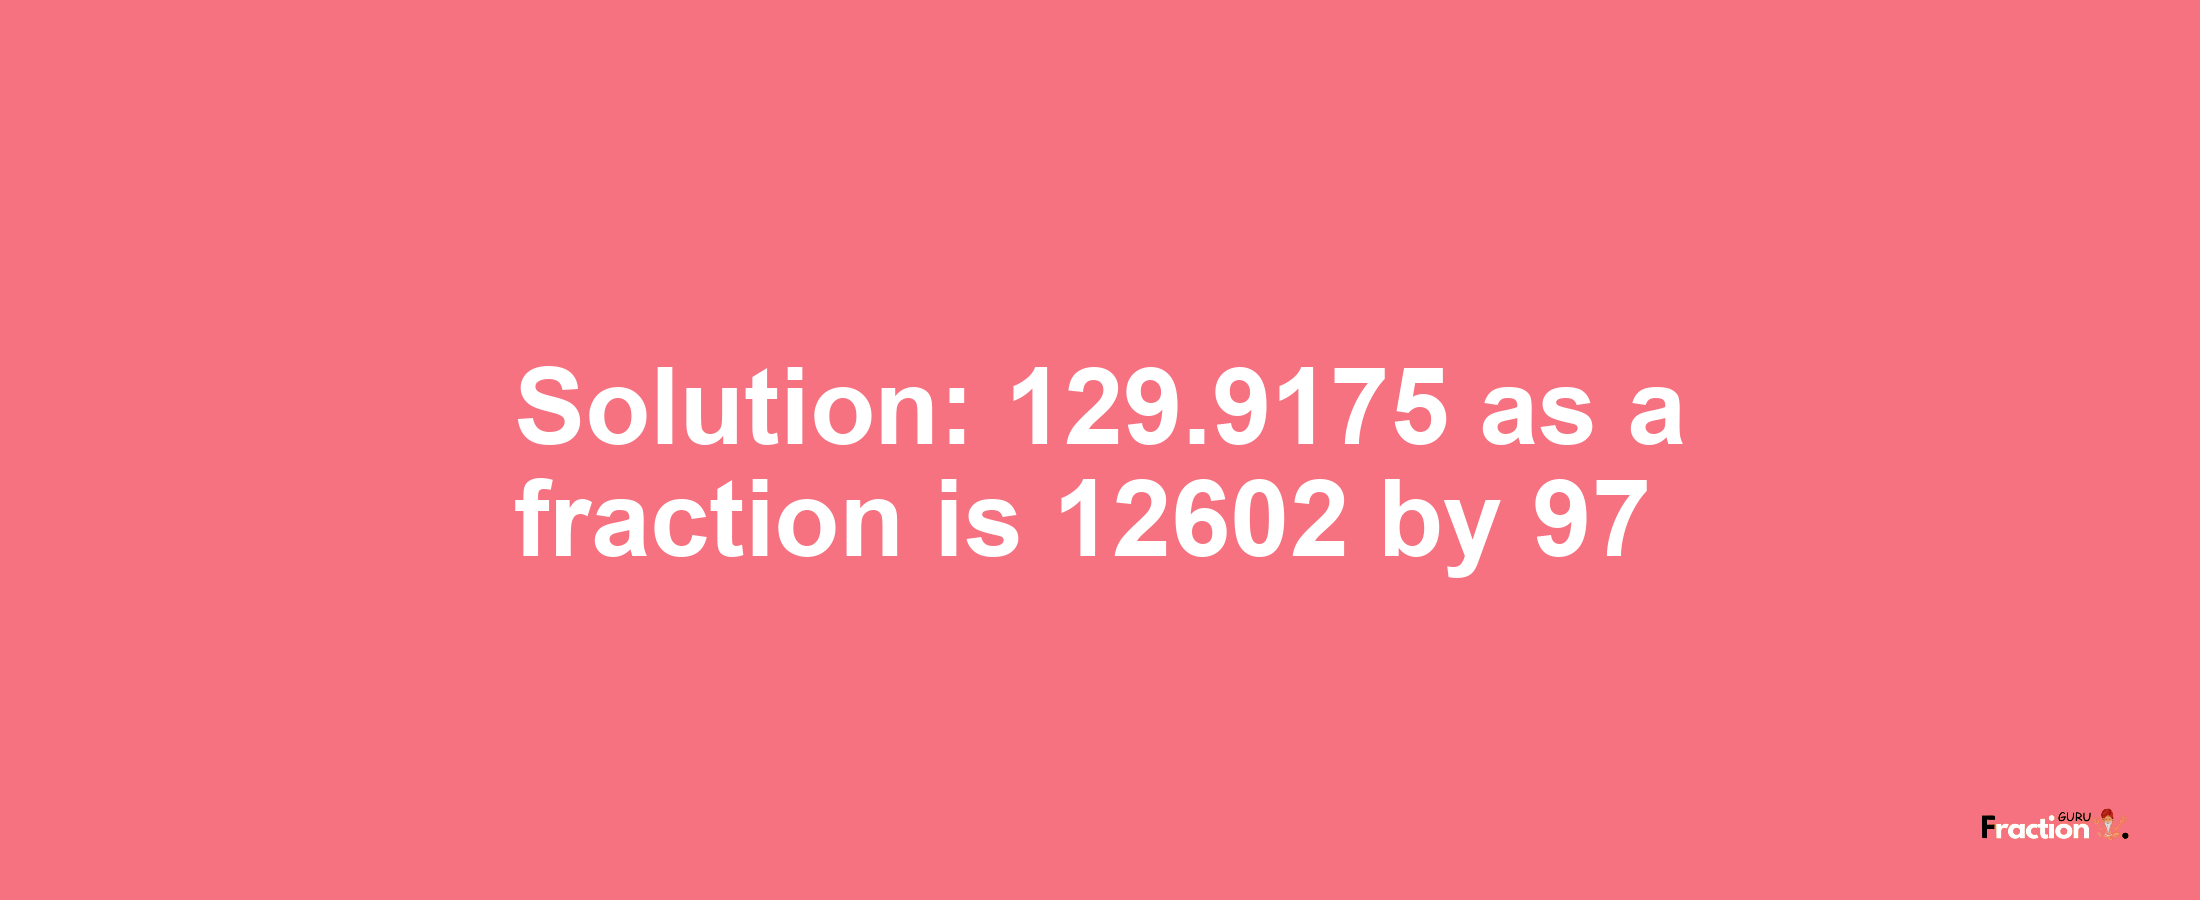 Solution:129.9175 as a fraction is 12602/97